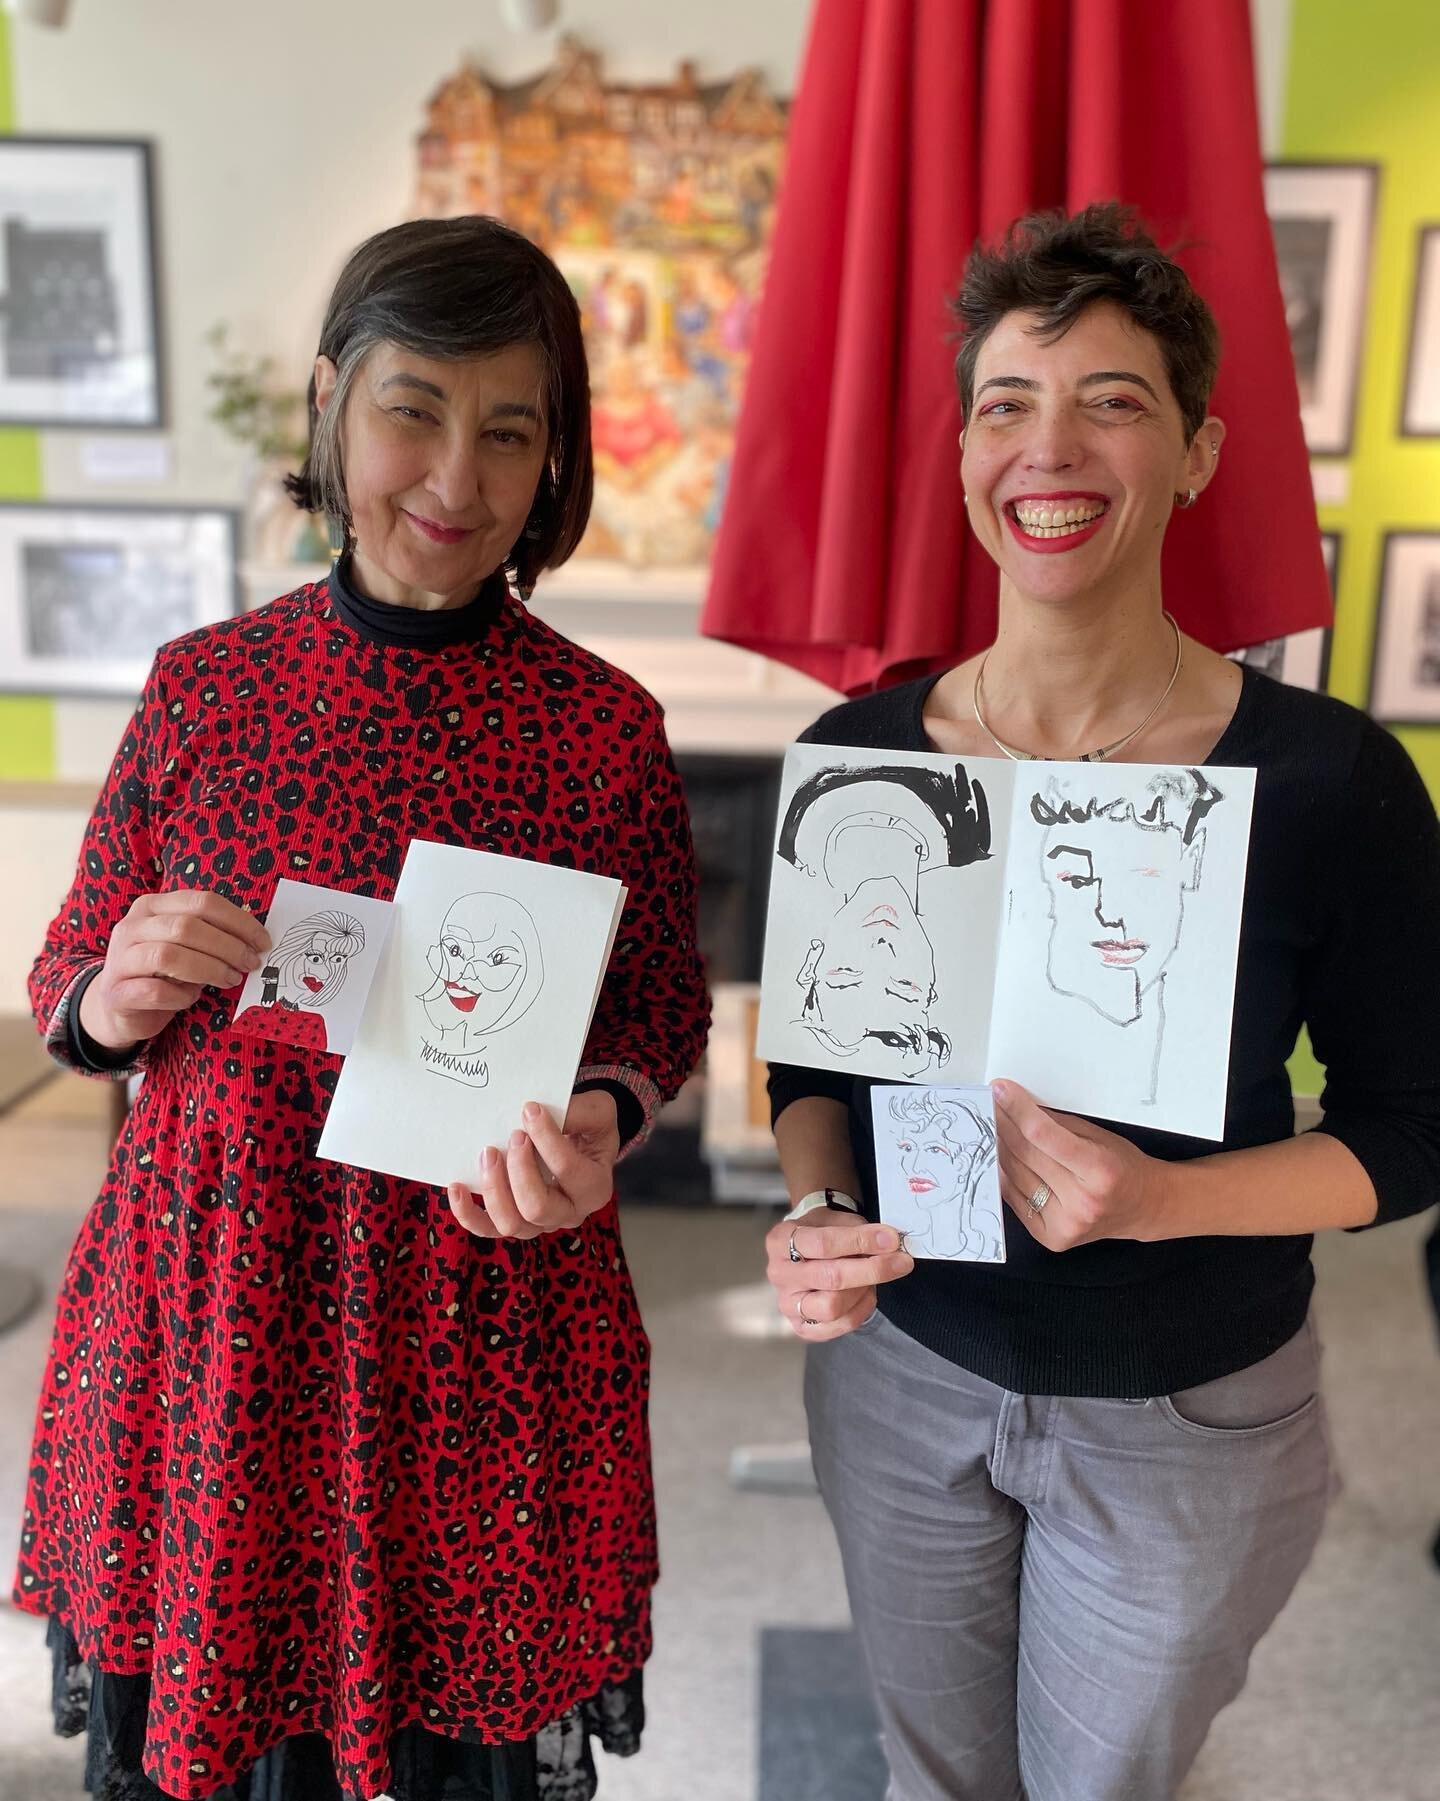 A great morning of creativity, collaboration and conversation with these #SketchyBitches! Turns out Monica and Branca&rsquo;s styles mesh together well 🙌 see co-creations in pic 2! 
😃✏️💛
#sketchappeal #womenwithpencils #drawdrawdraw